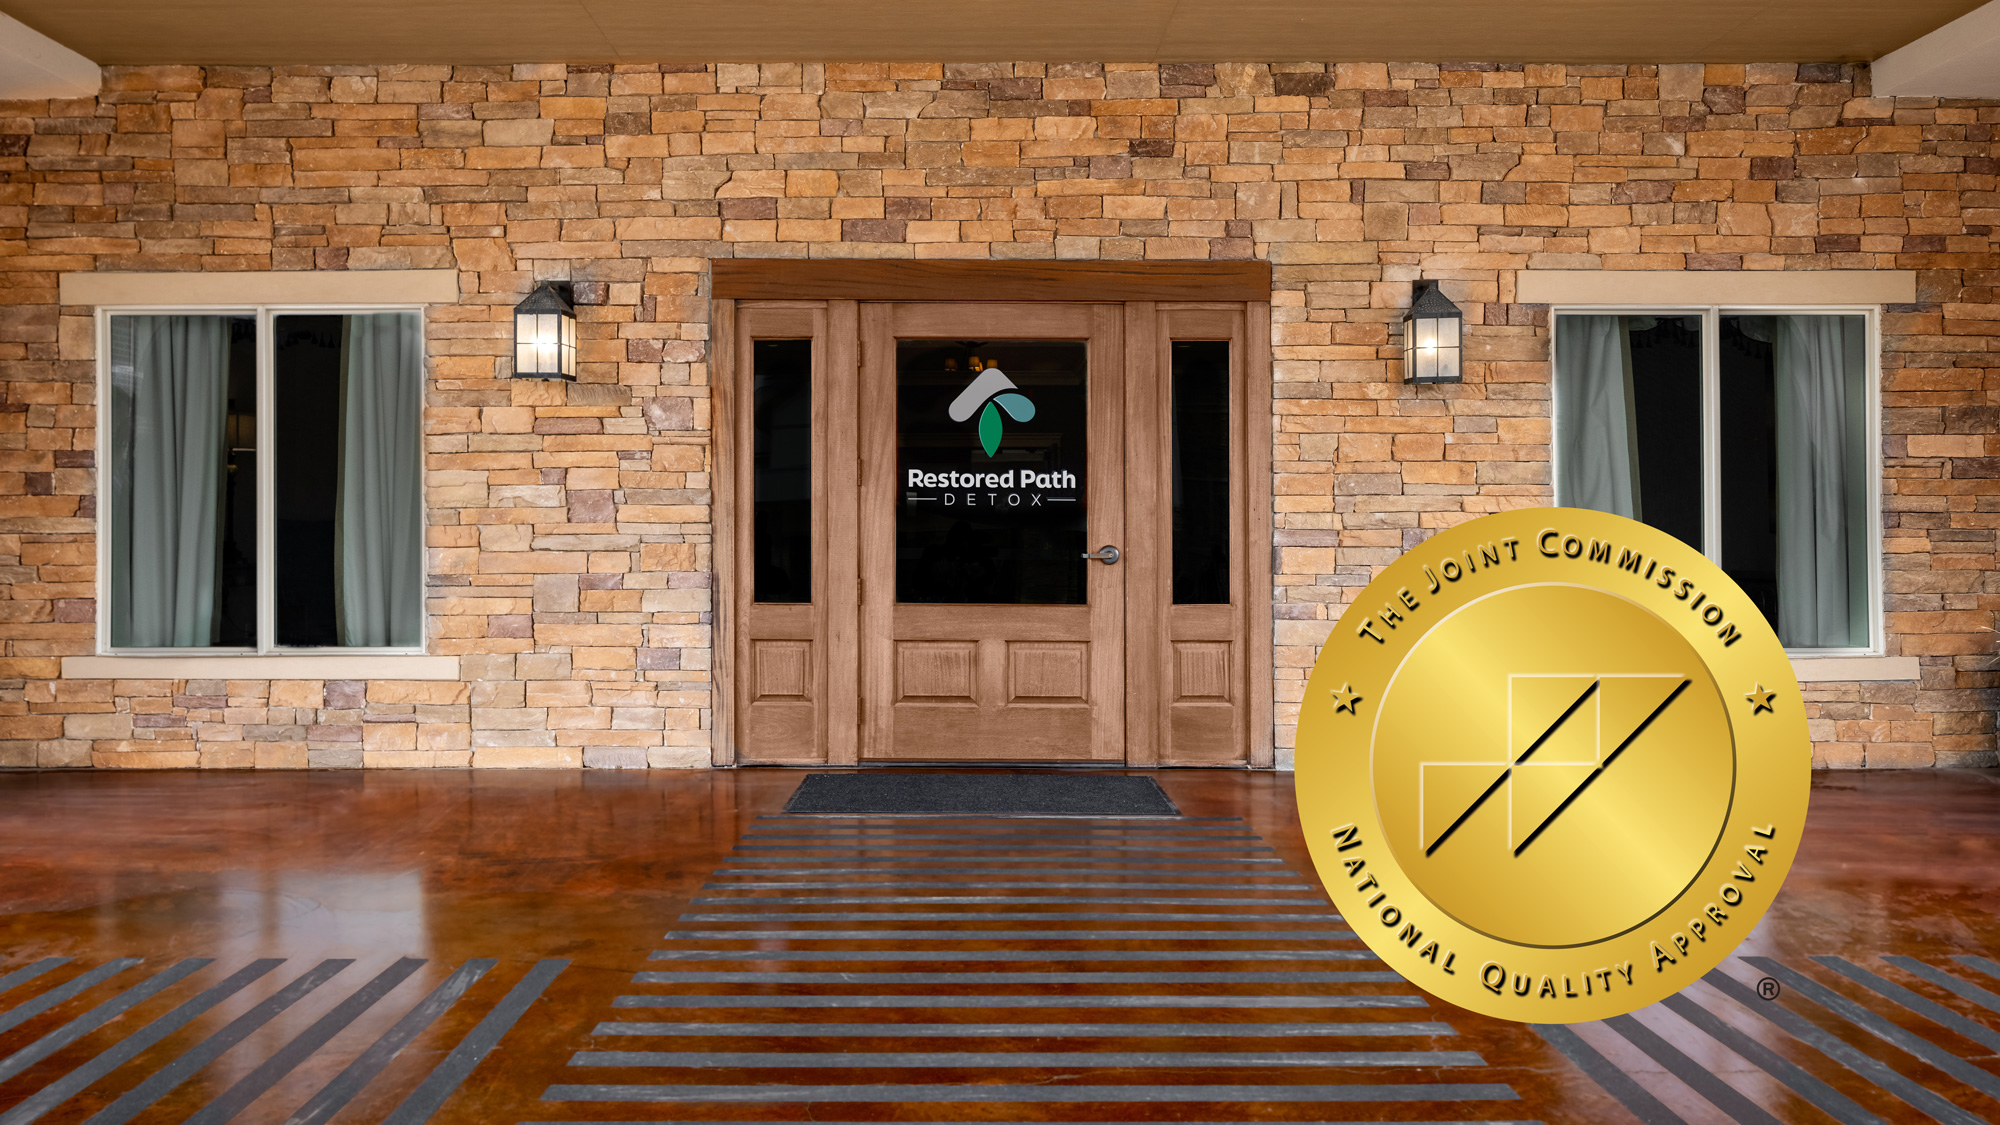 Restored Path Detox is pleased to announce that it has earned The Joint Commission’s Gold Seal of Approval® for accreditation.